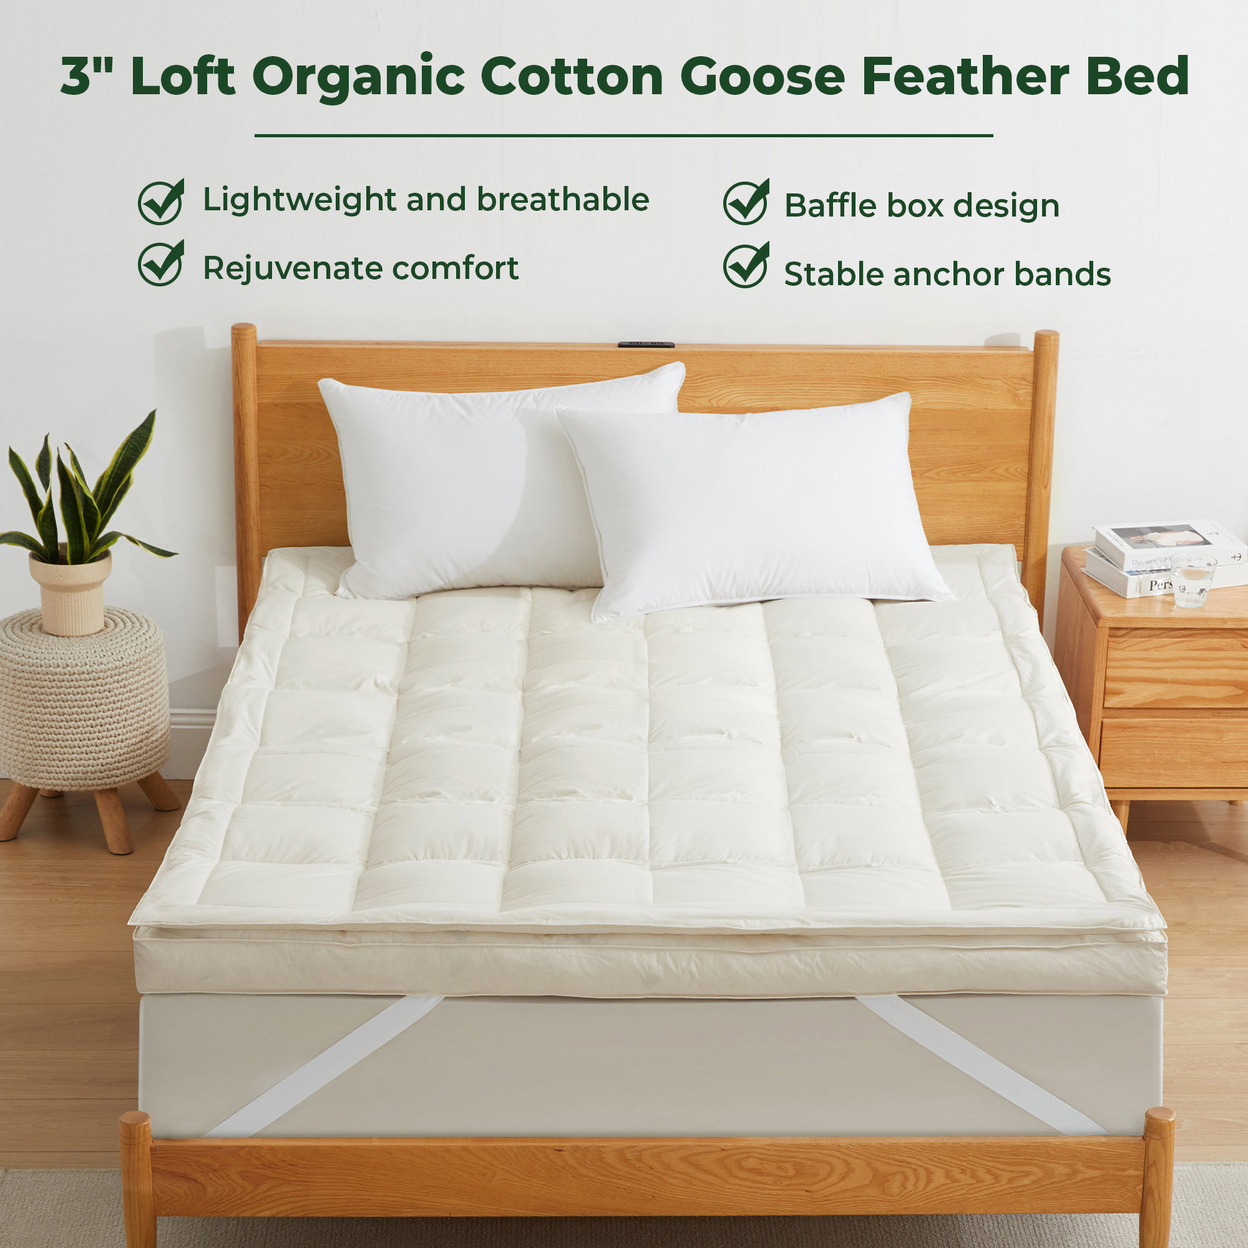 Premium White Goose Feather Mattress Topper, 3 Soft Feather Bed, 300 TC Organic Cotton Cover, Eco-friendly And Breathable - Queen, White